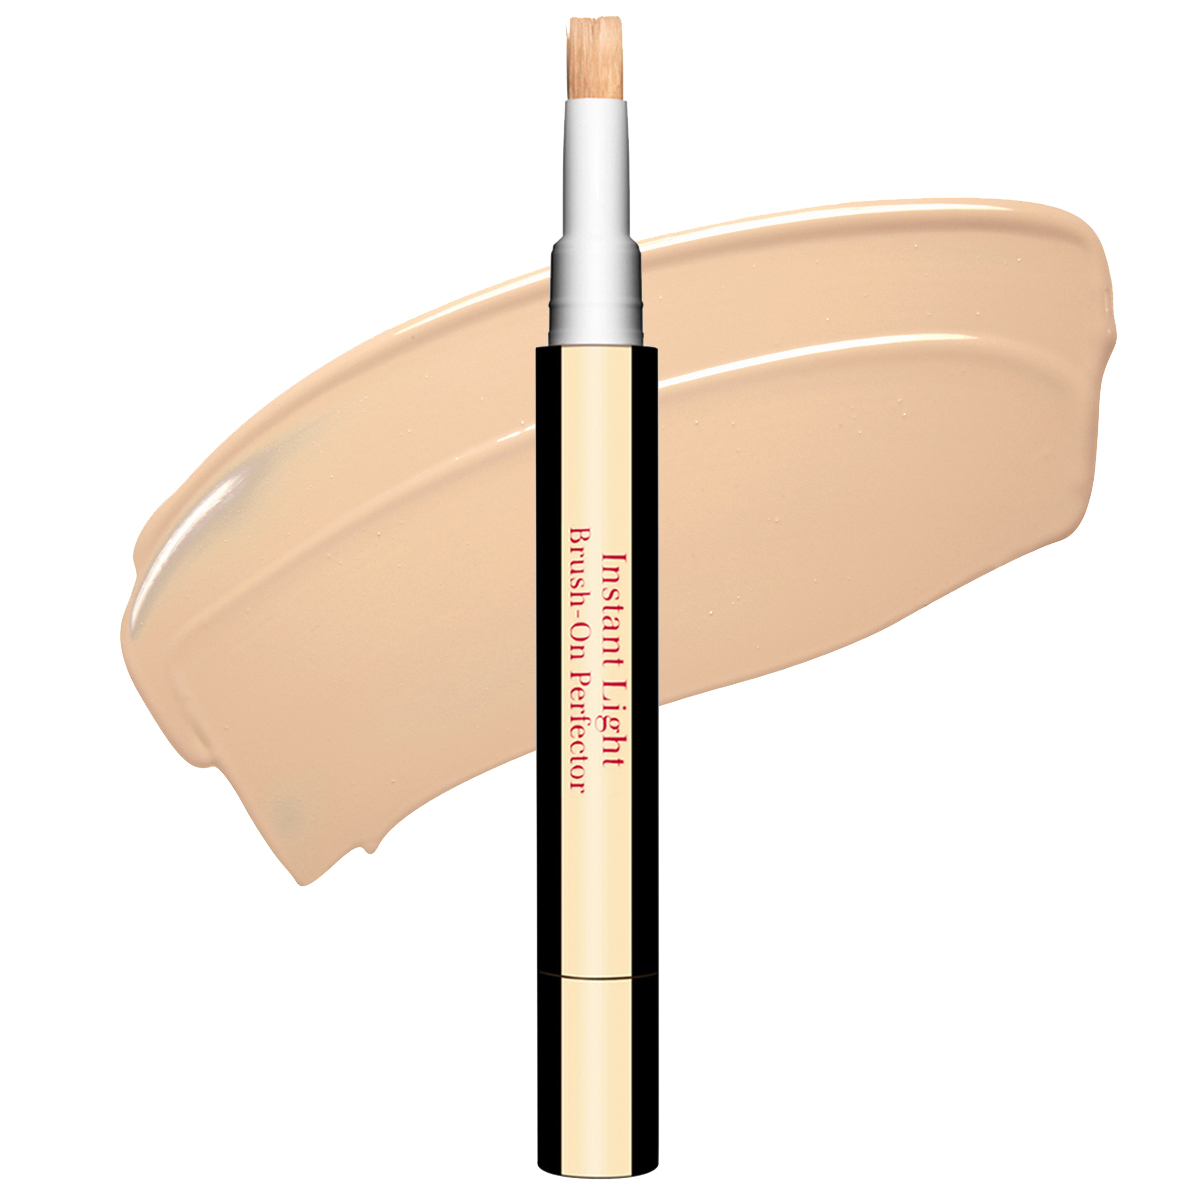 Clarins Instant Light Brush On Perfector 01 Pink Beige